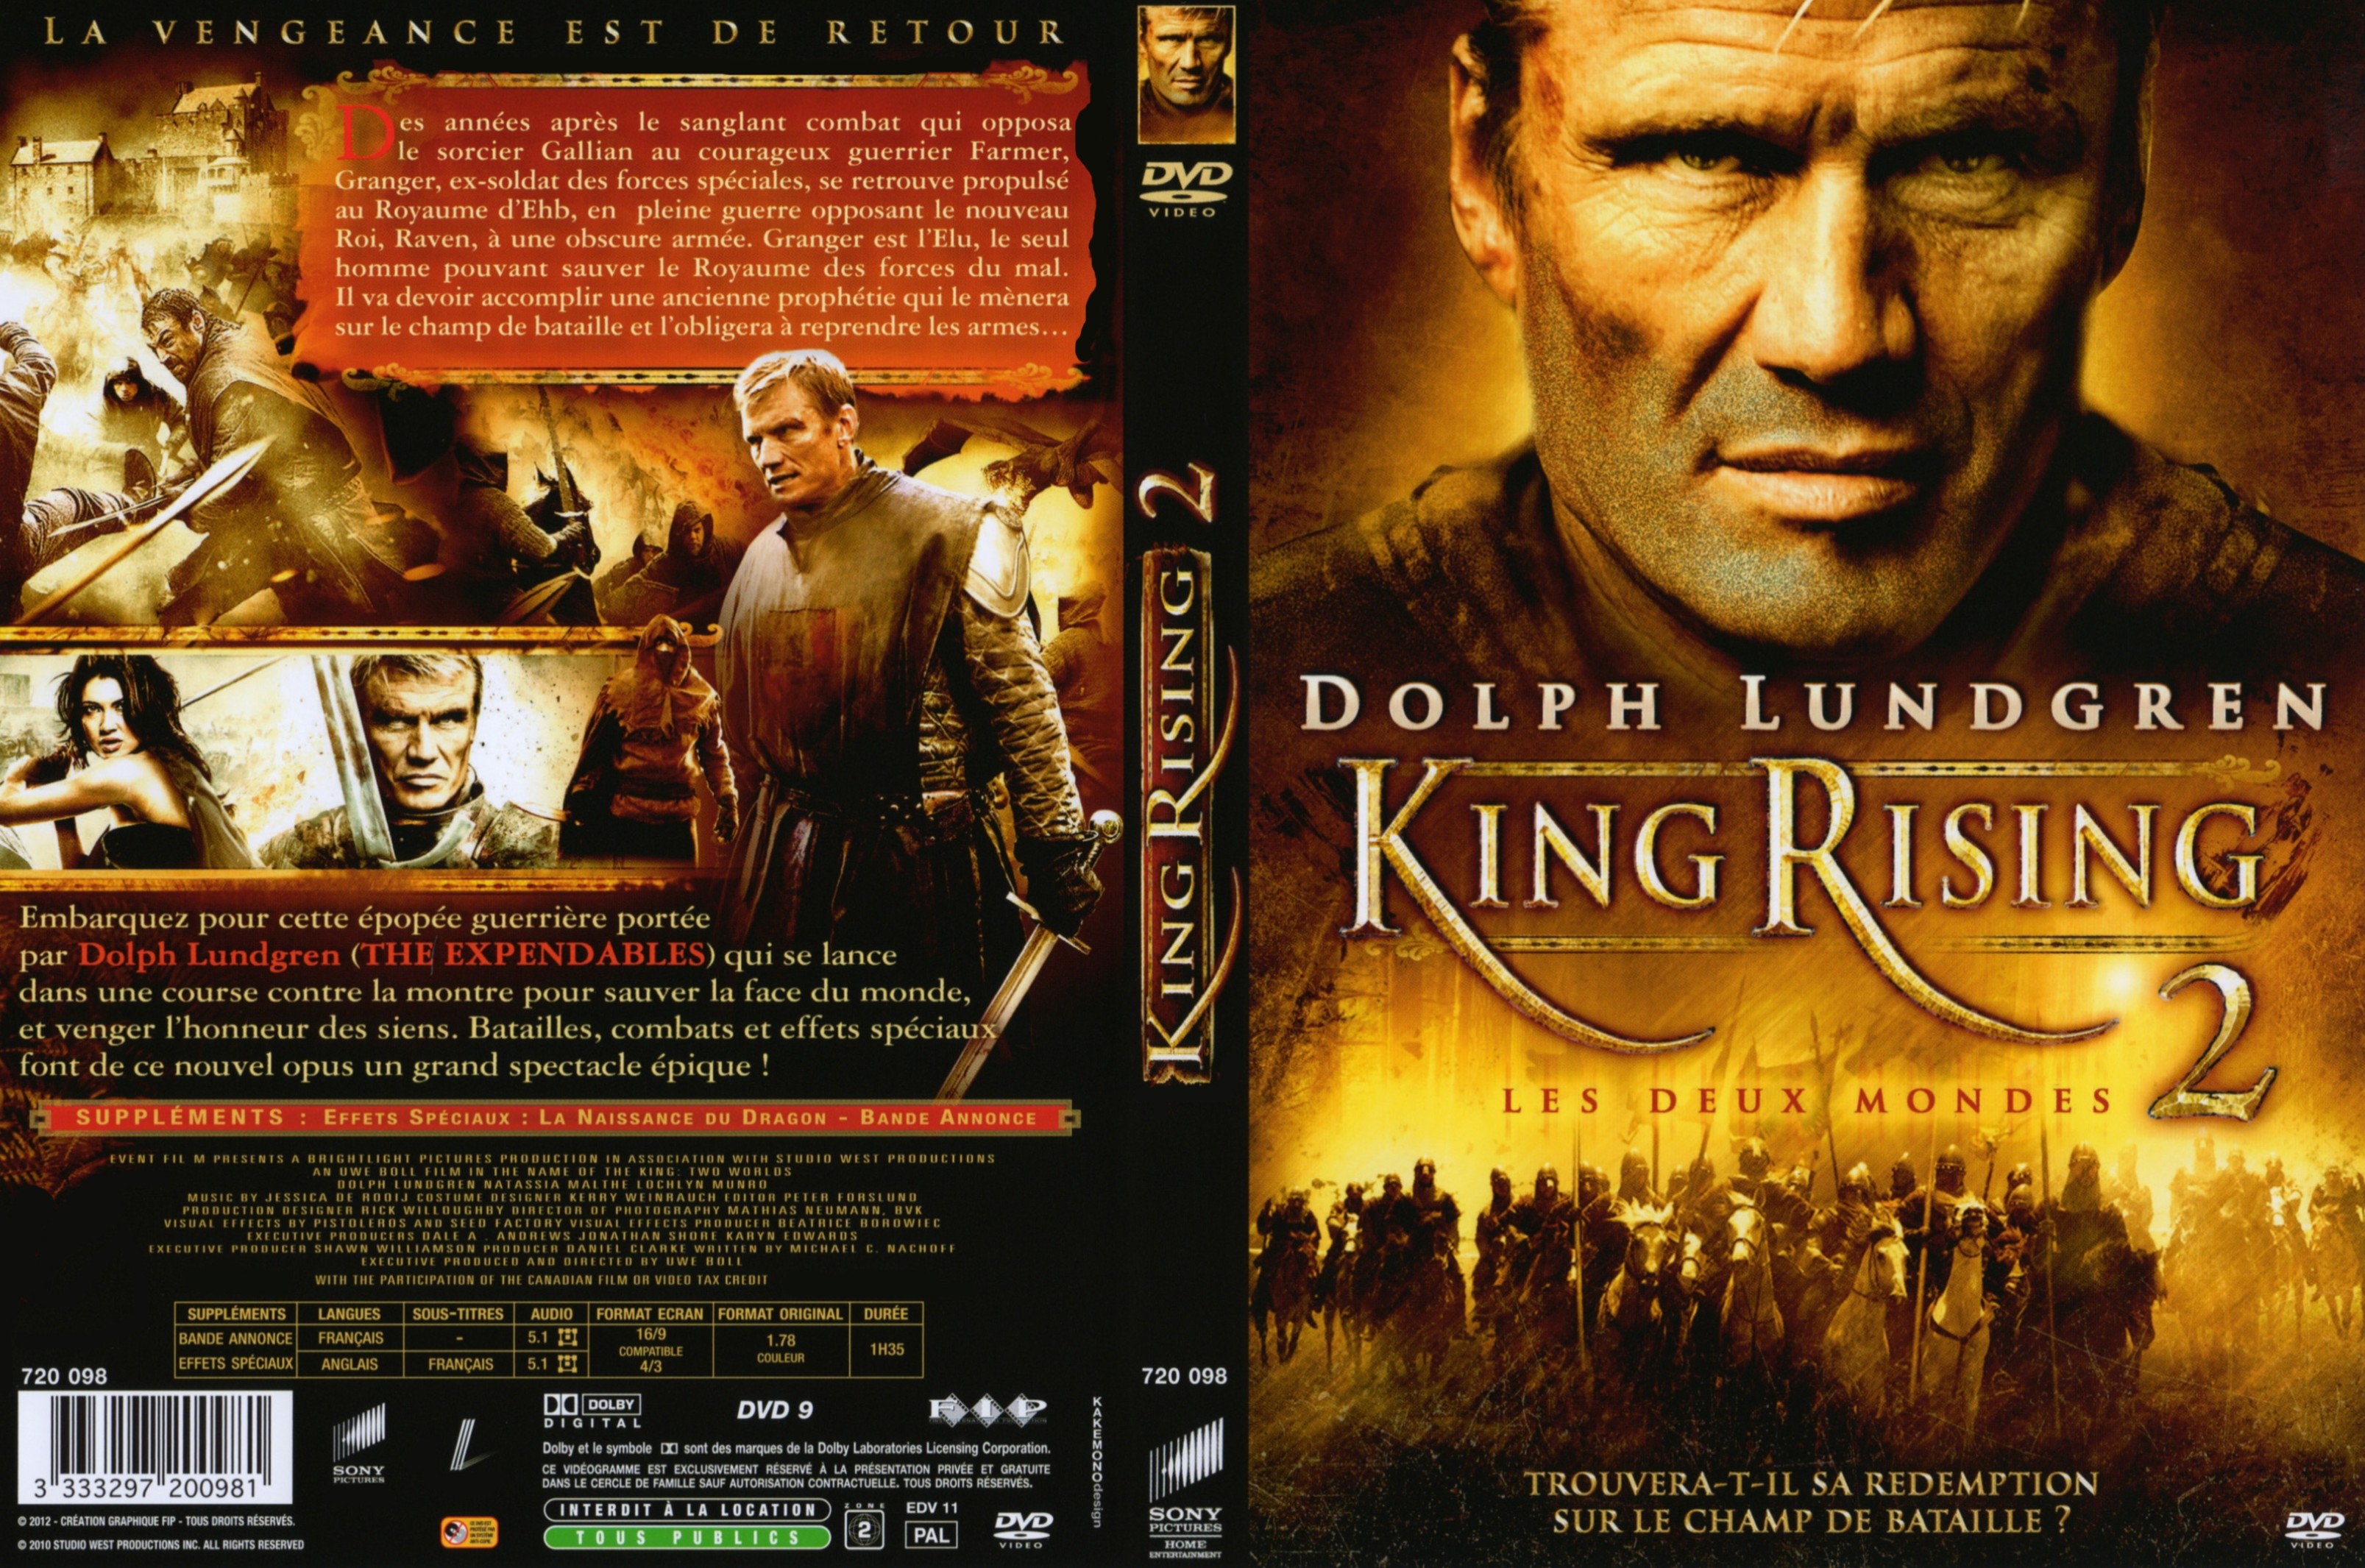 Jaquette DVD King Rising 2